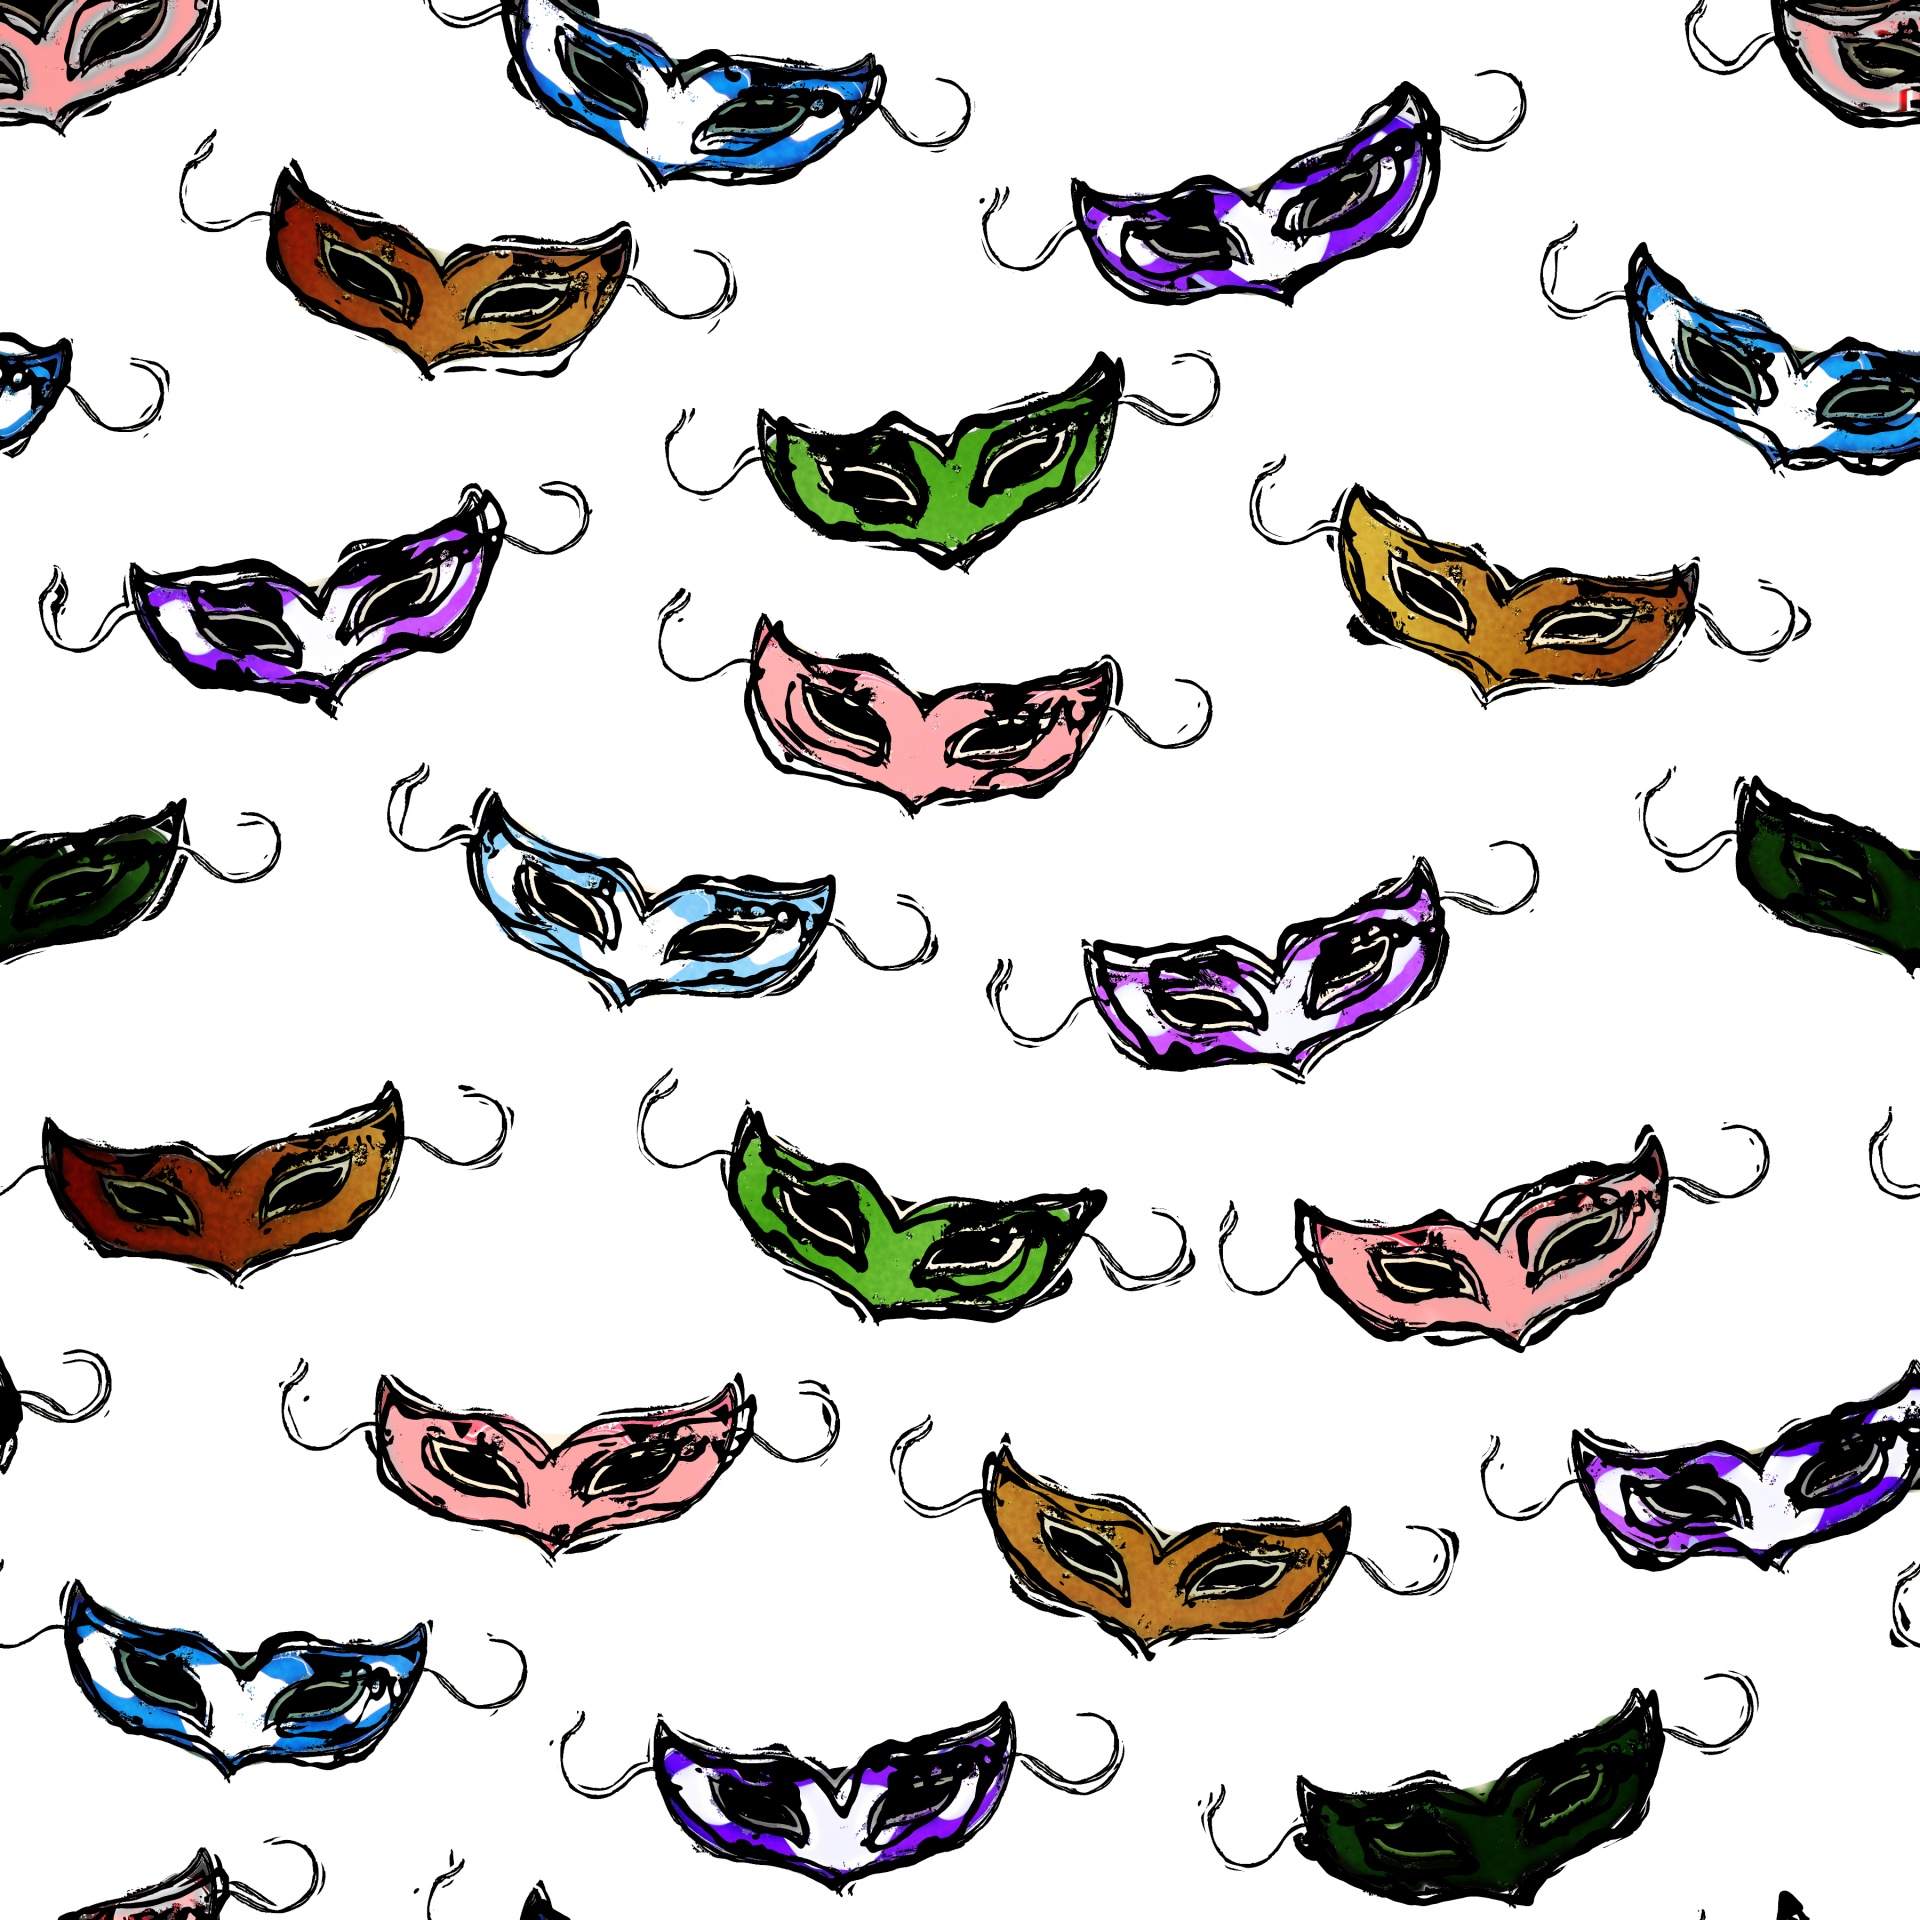 Mardi Gras Background of different colored eye masks